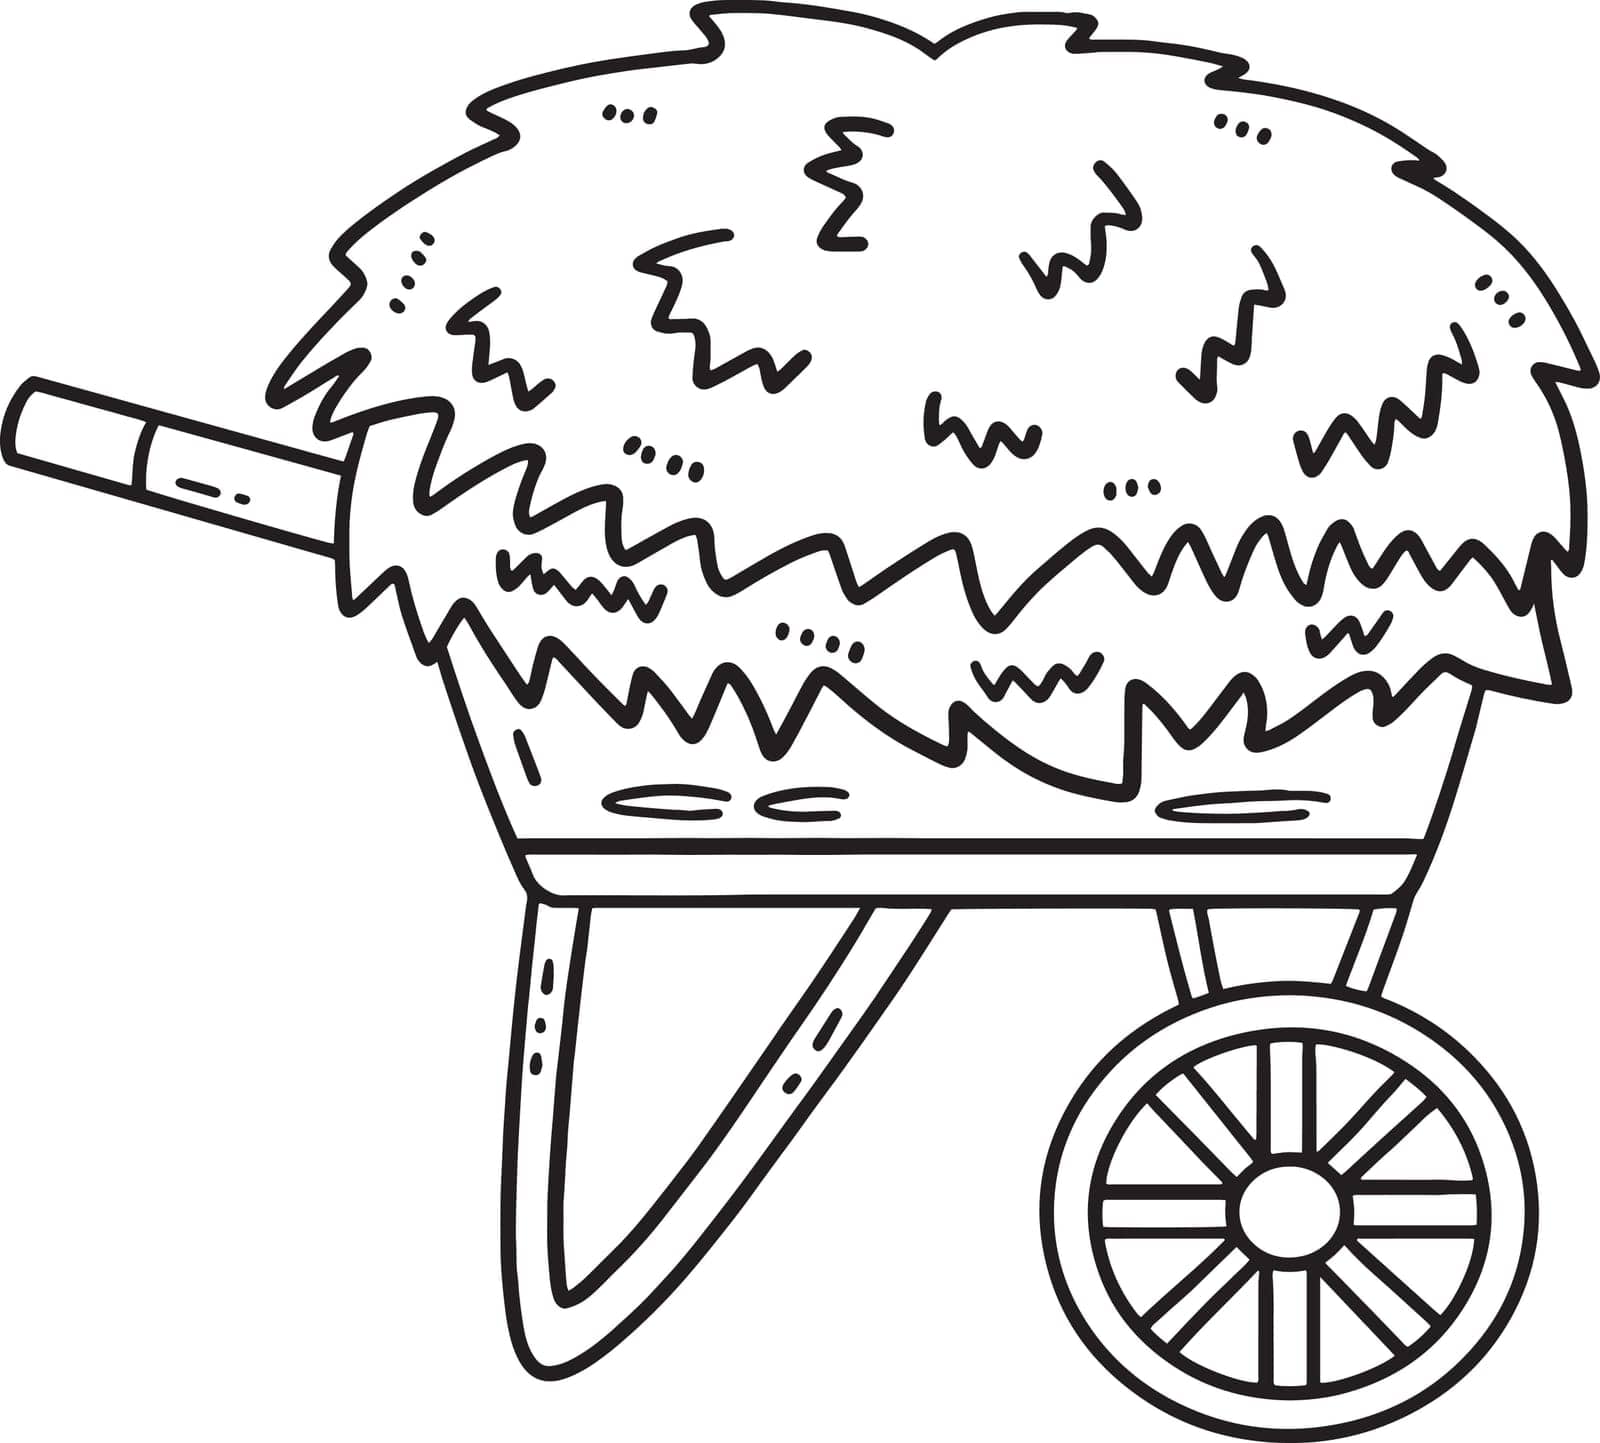 A cute and funny coloring page of a Wheelbarrow Hay. Provides hours of coloring fun for children. To color, this page is very easy. Suitable for little kids and toddlers.